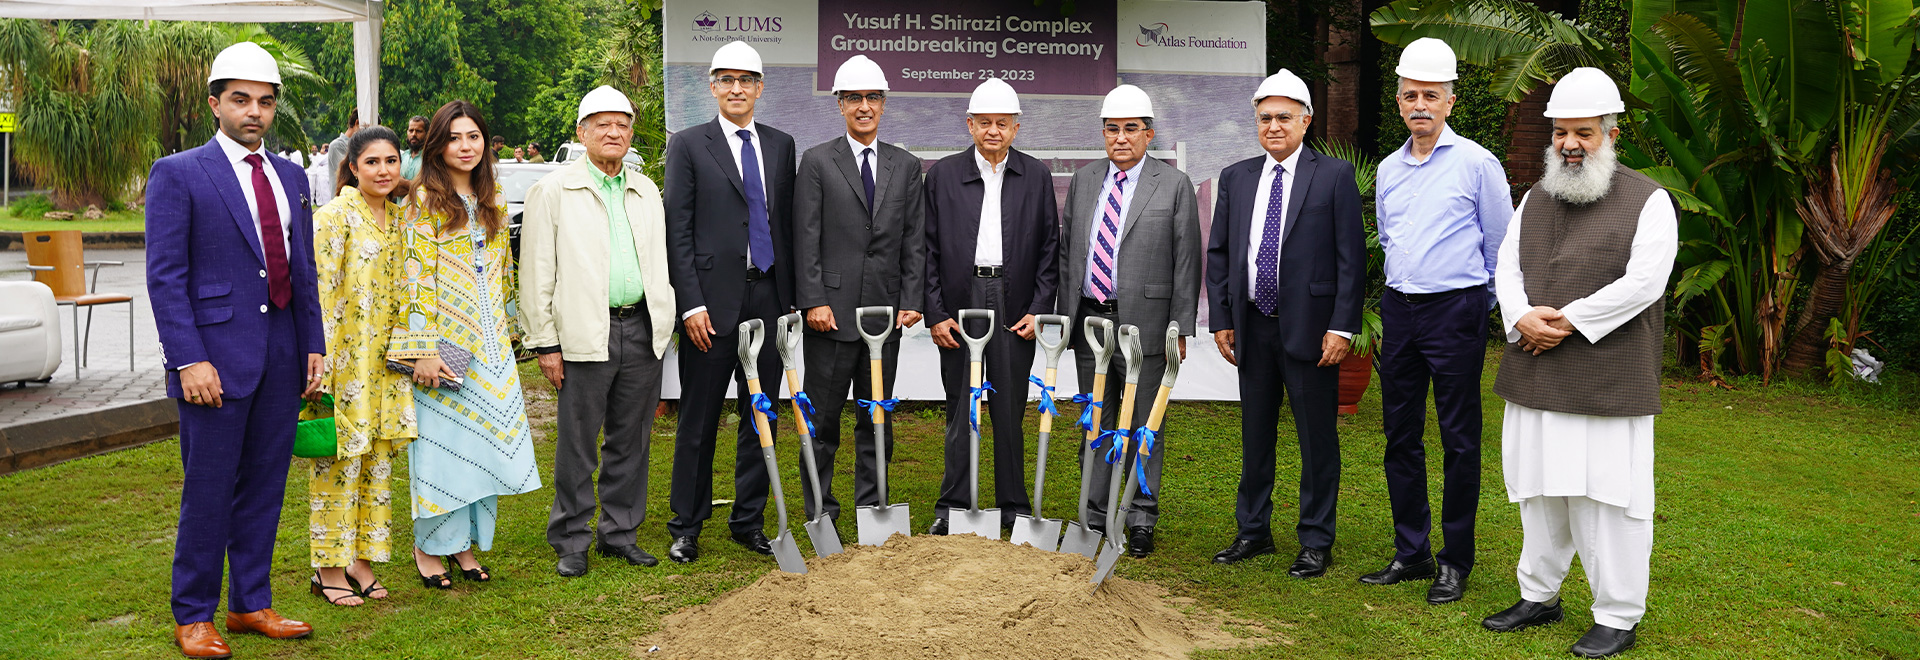 Groundbreaking Ceremony of Yusuf H. Shirazi Complex Takes Place at LUMS